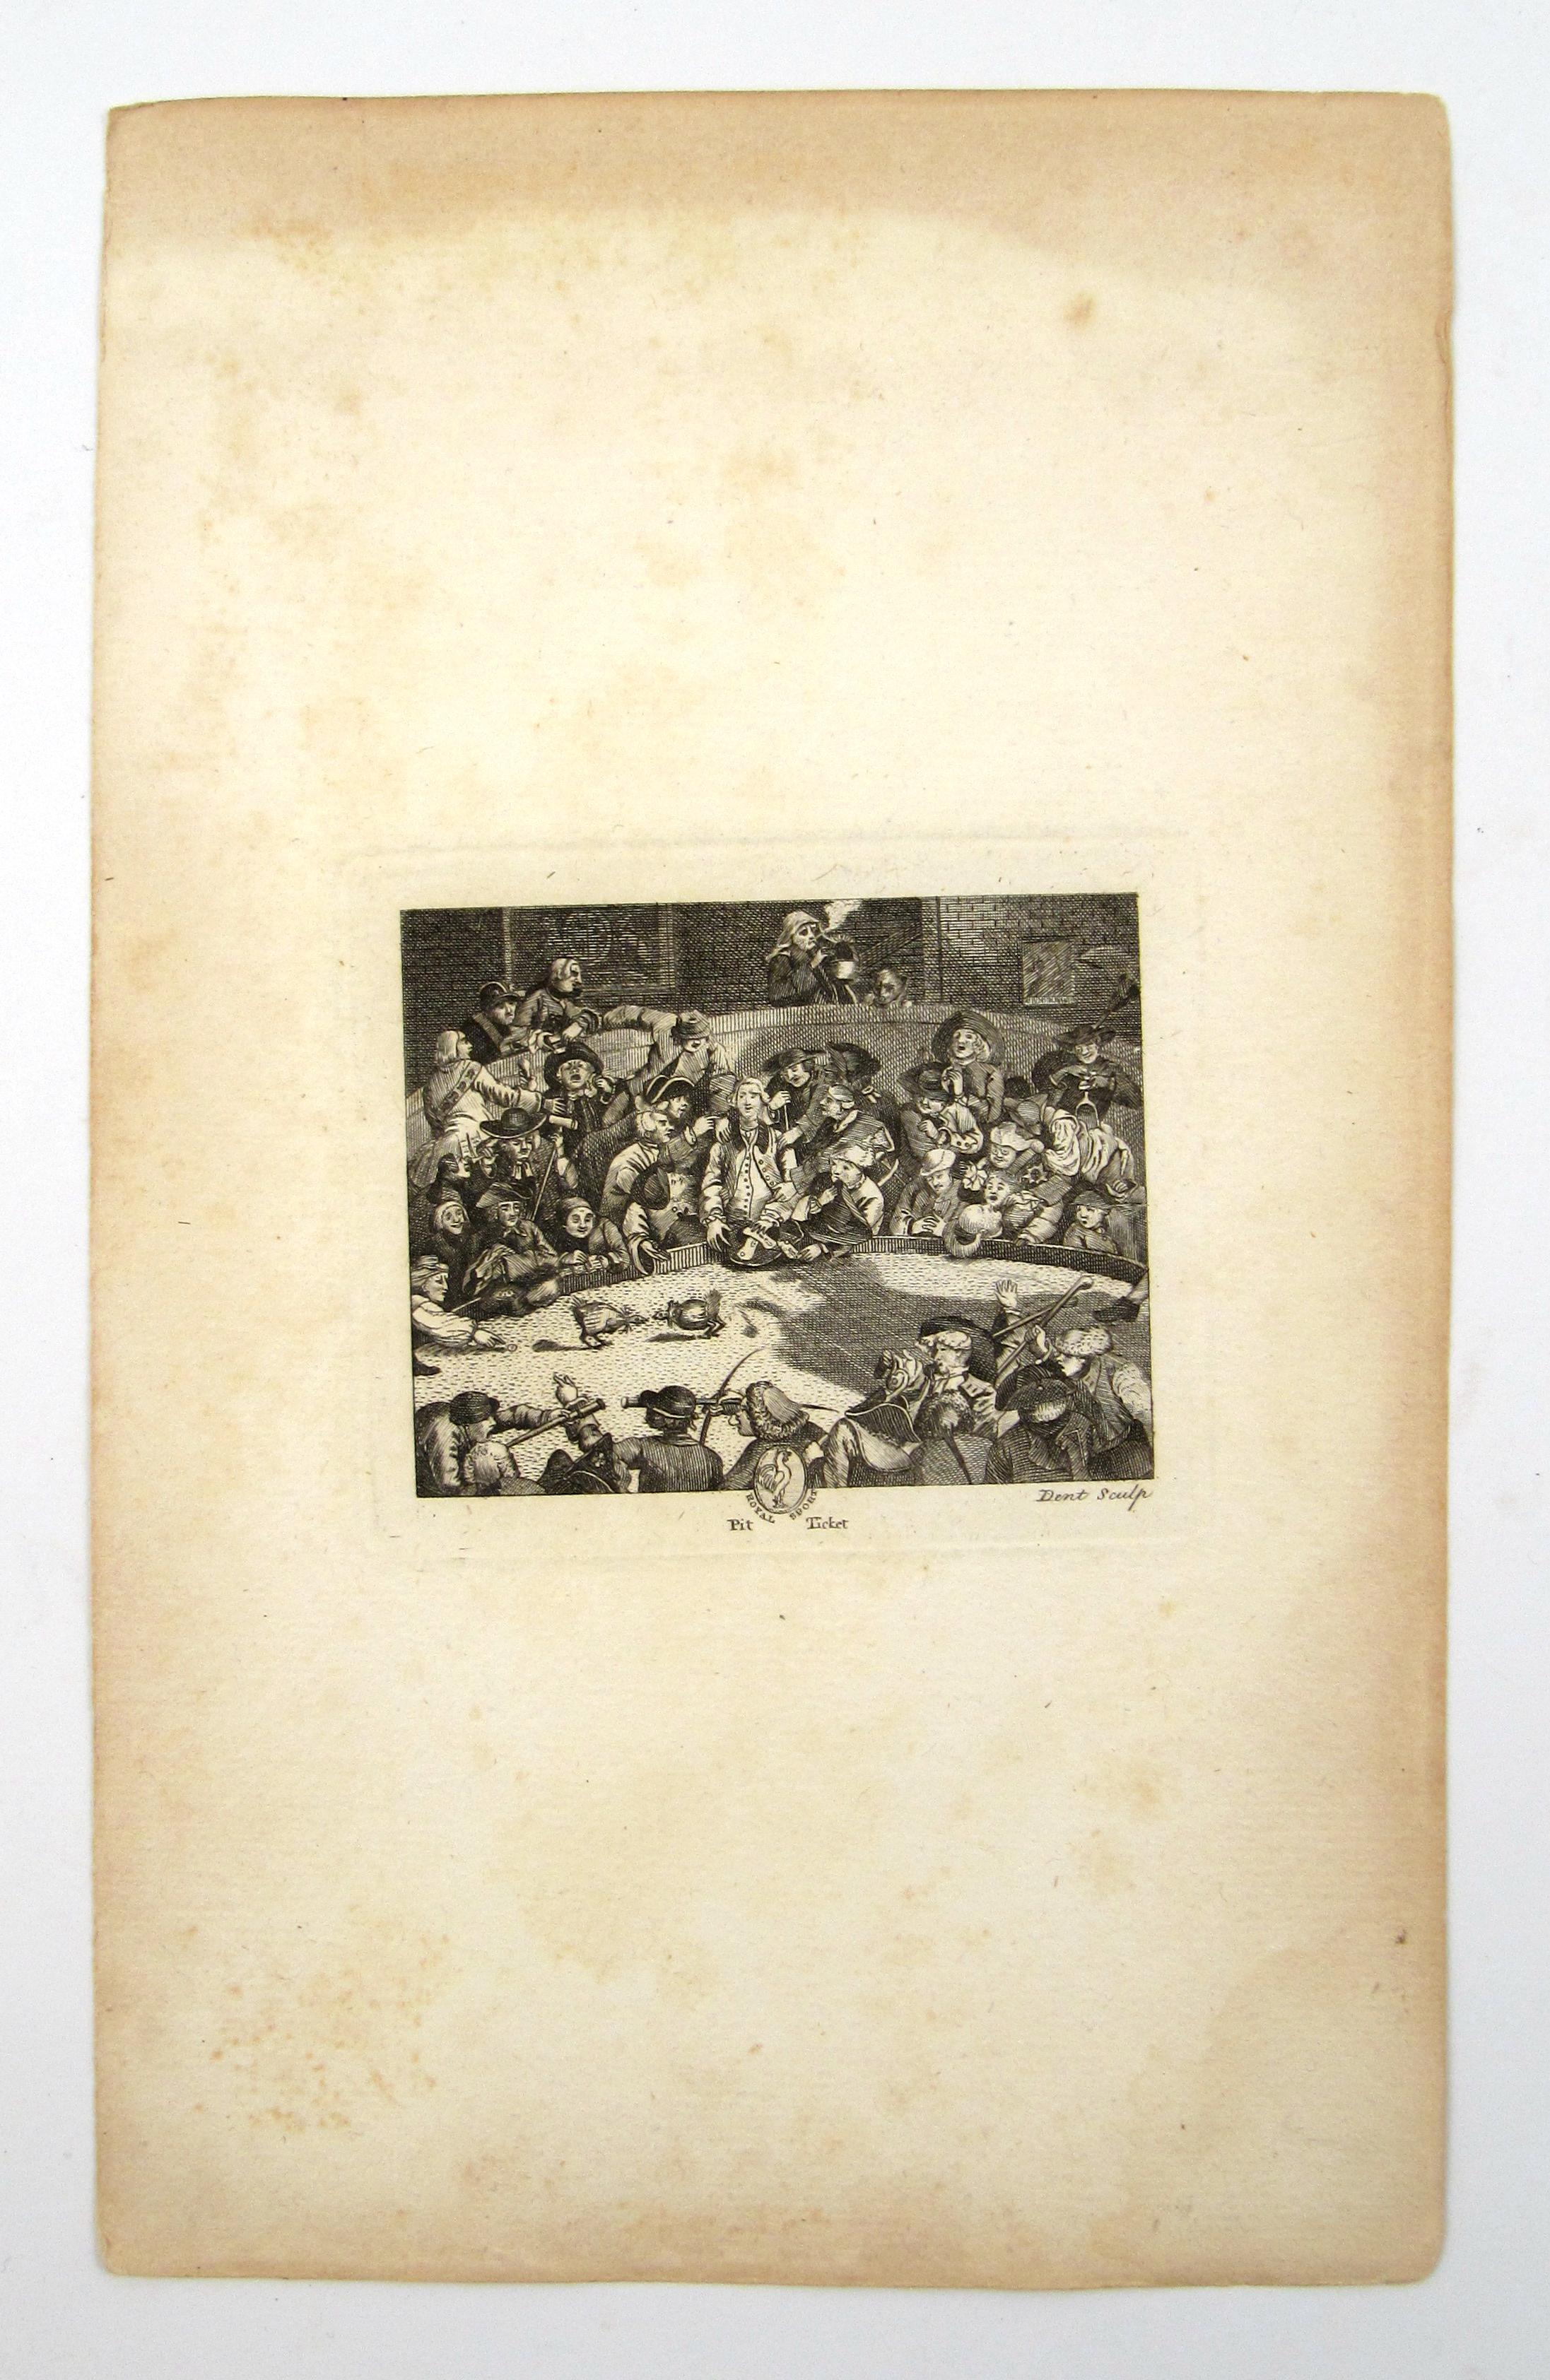 Royal Sports PIT TICKET - 18thC Entry Ticket to Cock Fight in Georgian England - Print by William Hogarth